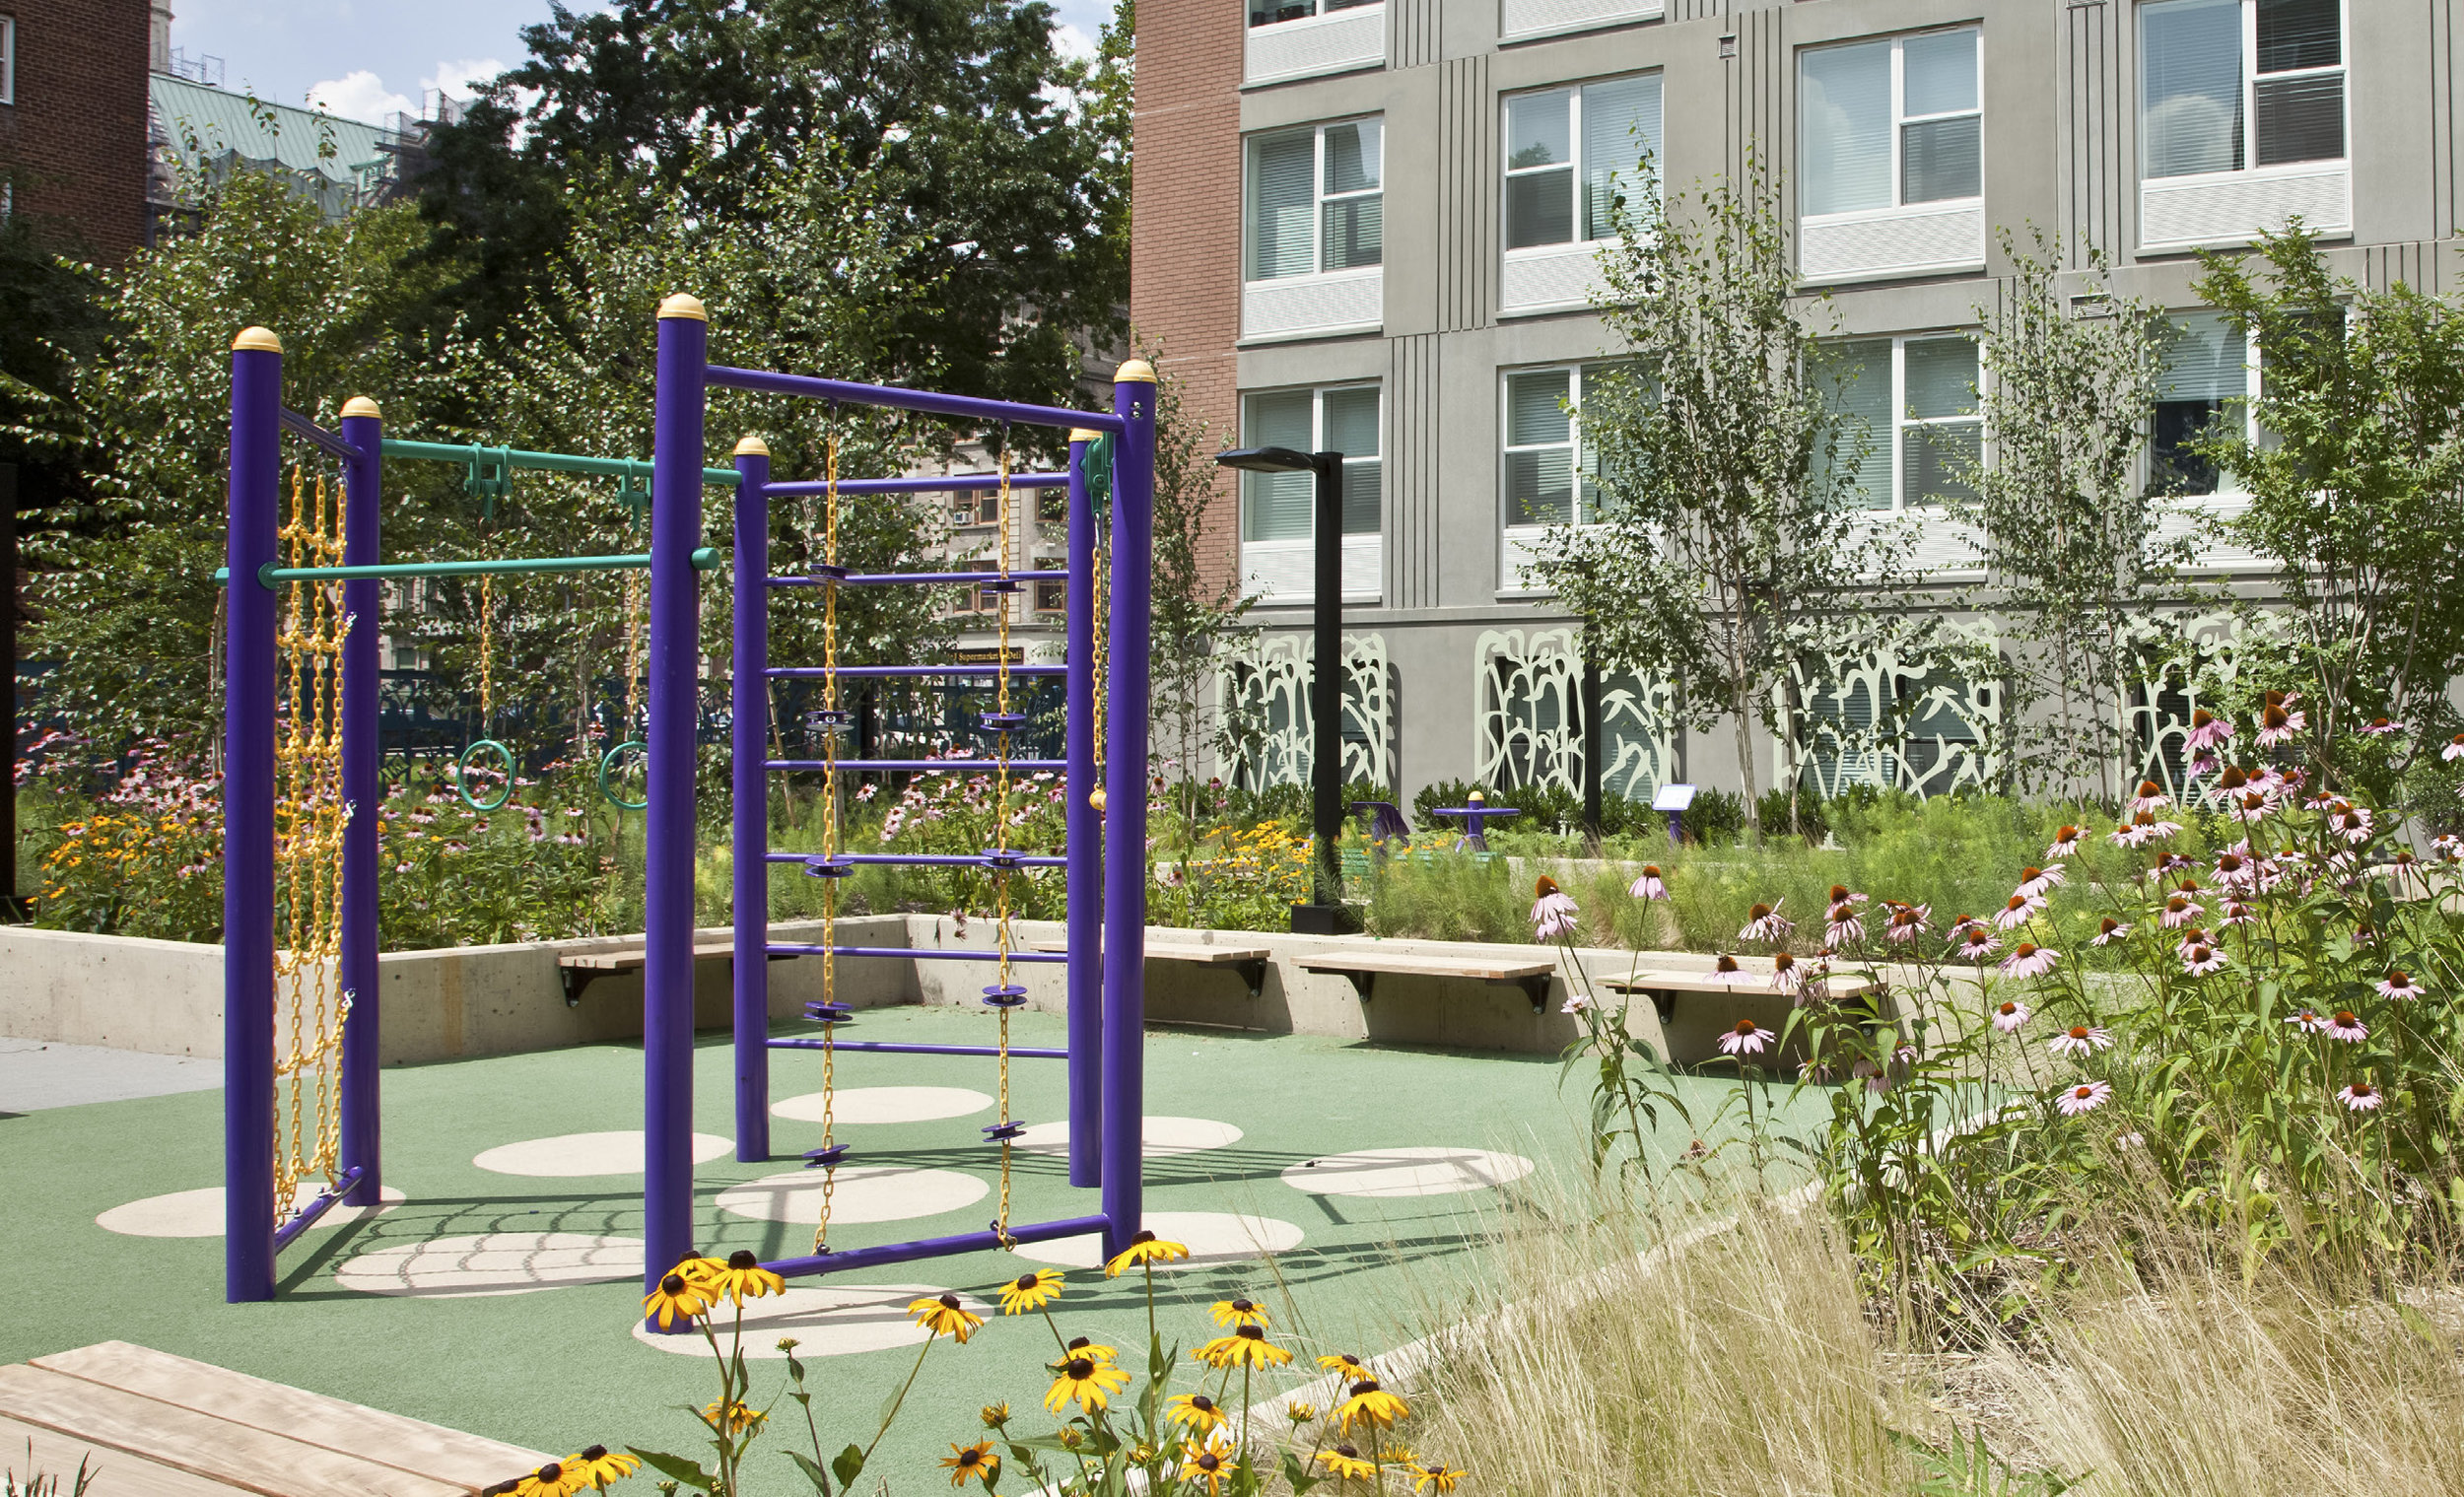 Policy Brief: Understanding the Impact of Active Design in Affordable Housing